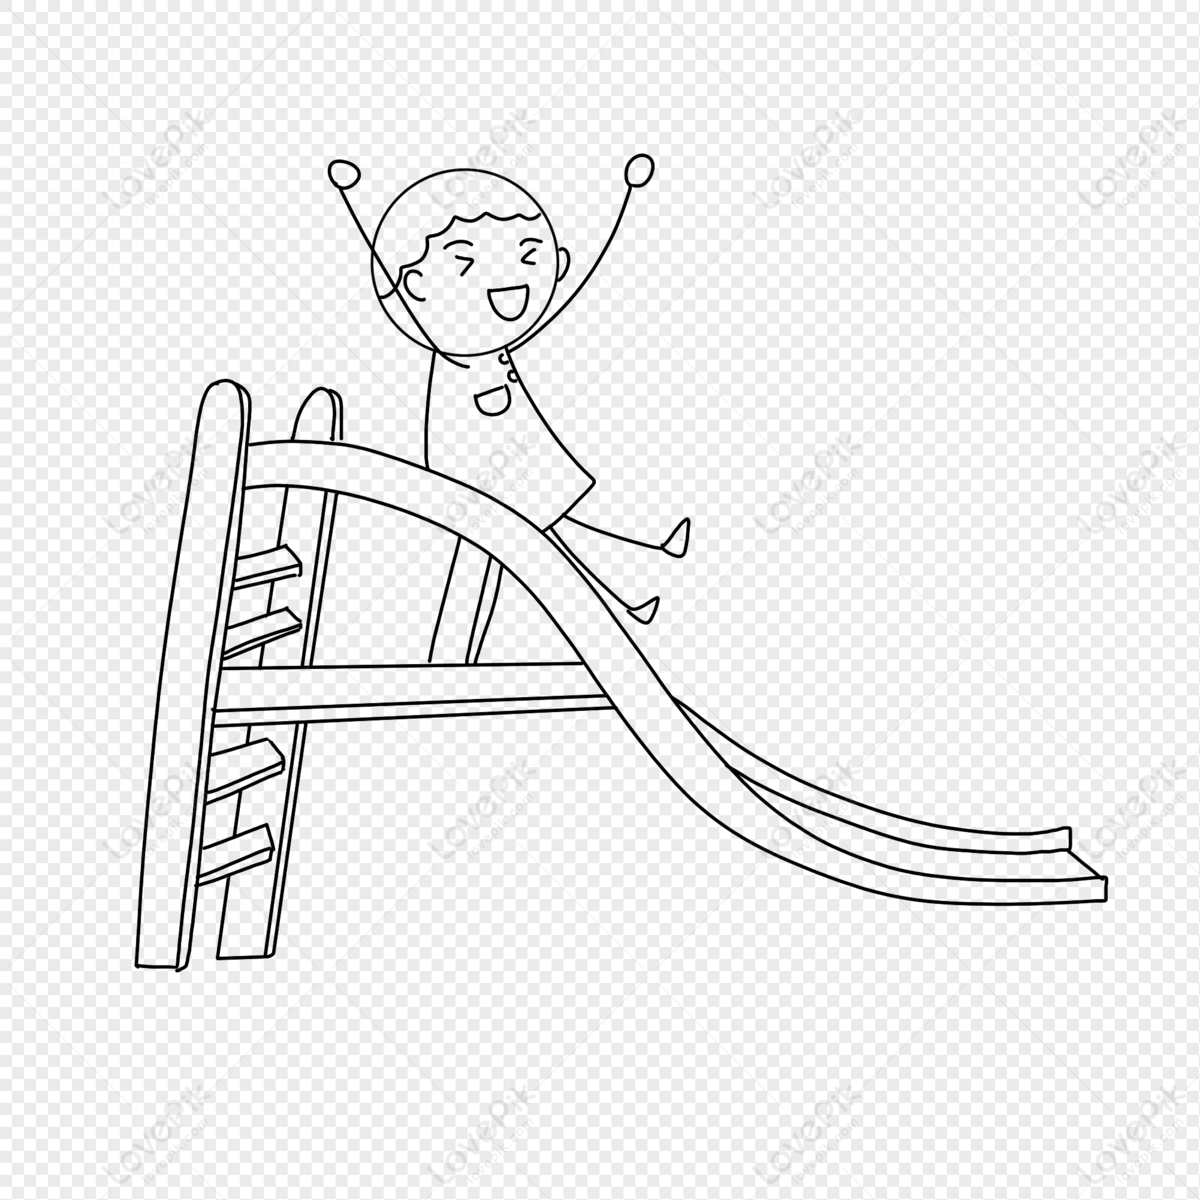 lovepik stick figure of a boy playing on the slide png image 401731338 wh1200